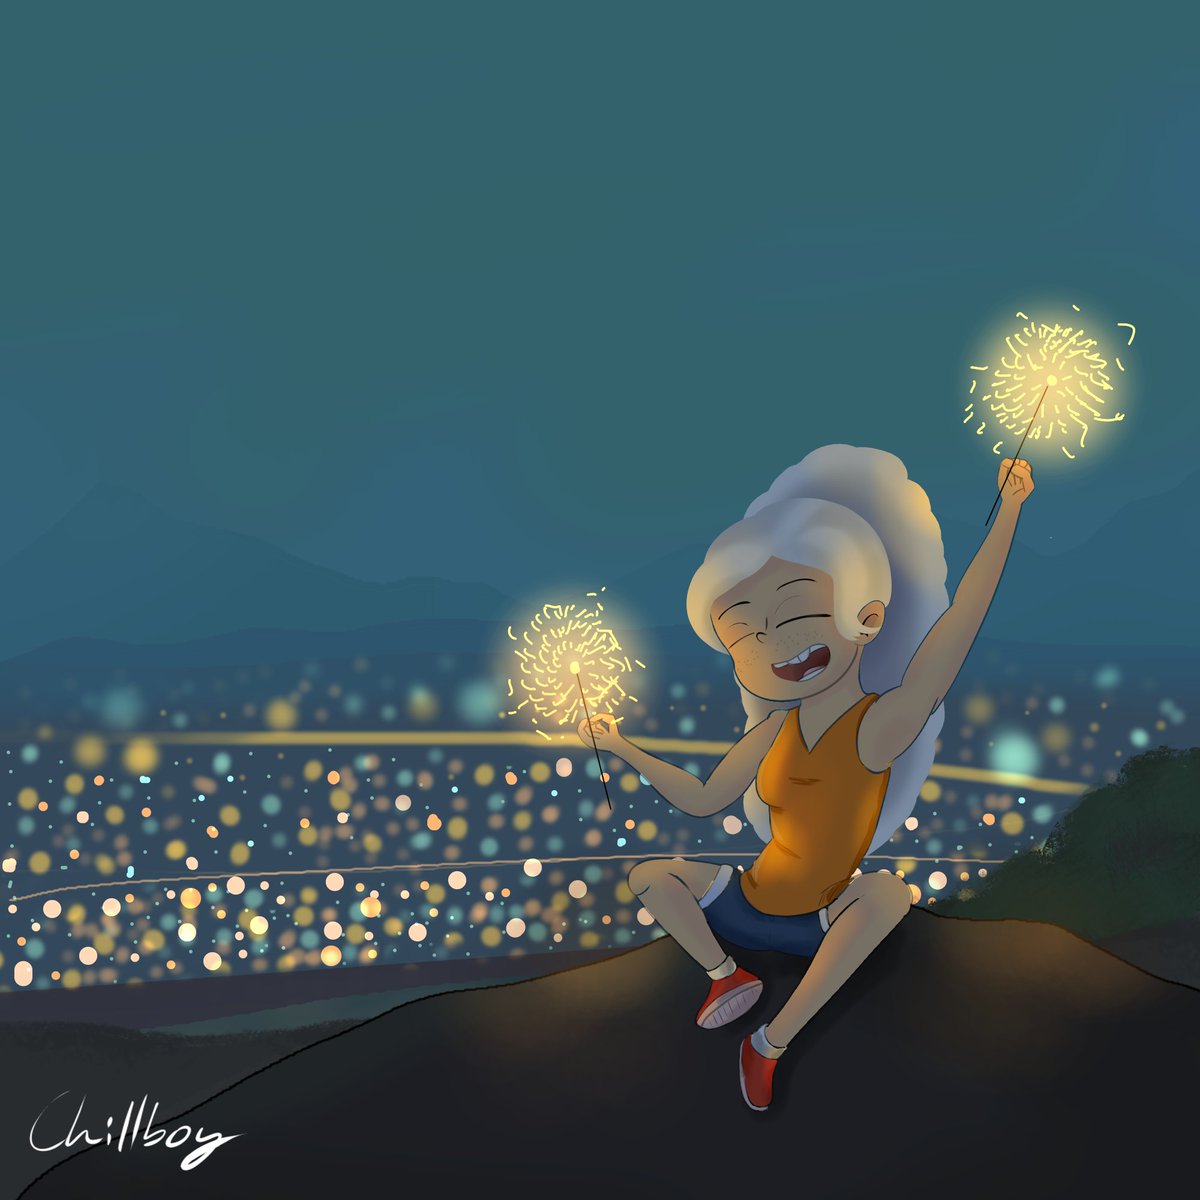 Happy 2023 everyone! Have a safe year, even though it hasn't been the best already
-
-
#digitialart #digitalpainting #illustration #NewYears2023 #LinkaLoud #chillboyart